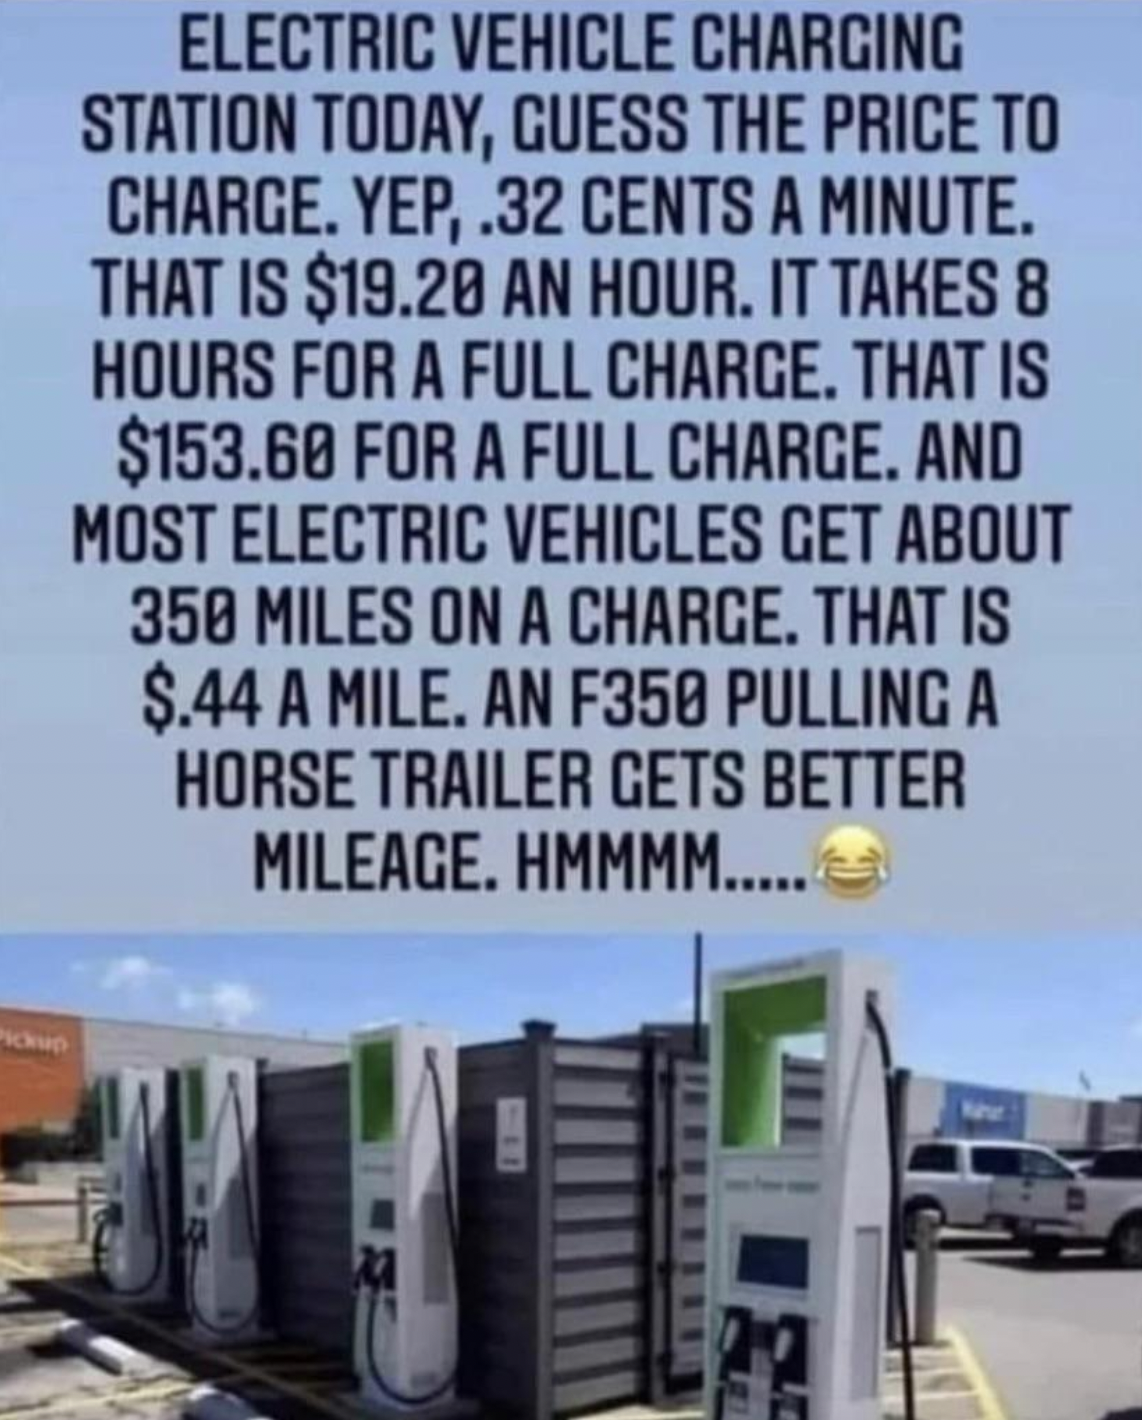 Confidently incorrect - Electric Vehicle Charging Station Today,Guess The Price To Charge. Yep, .32 Cents A Minute.